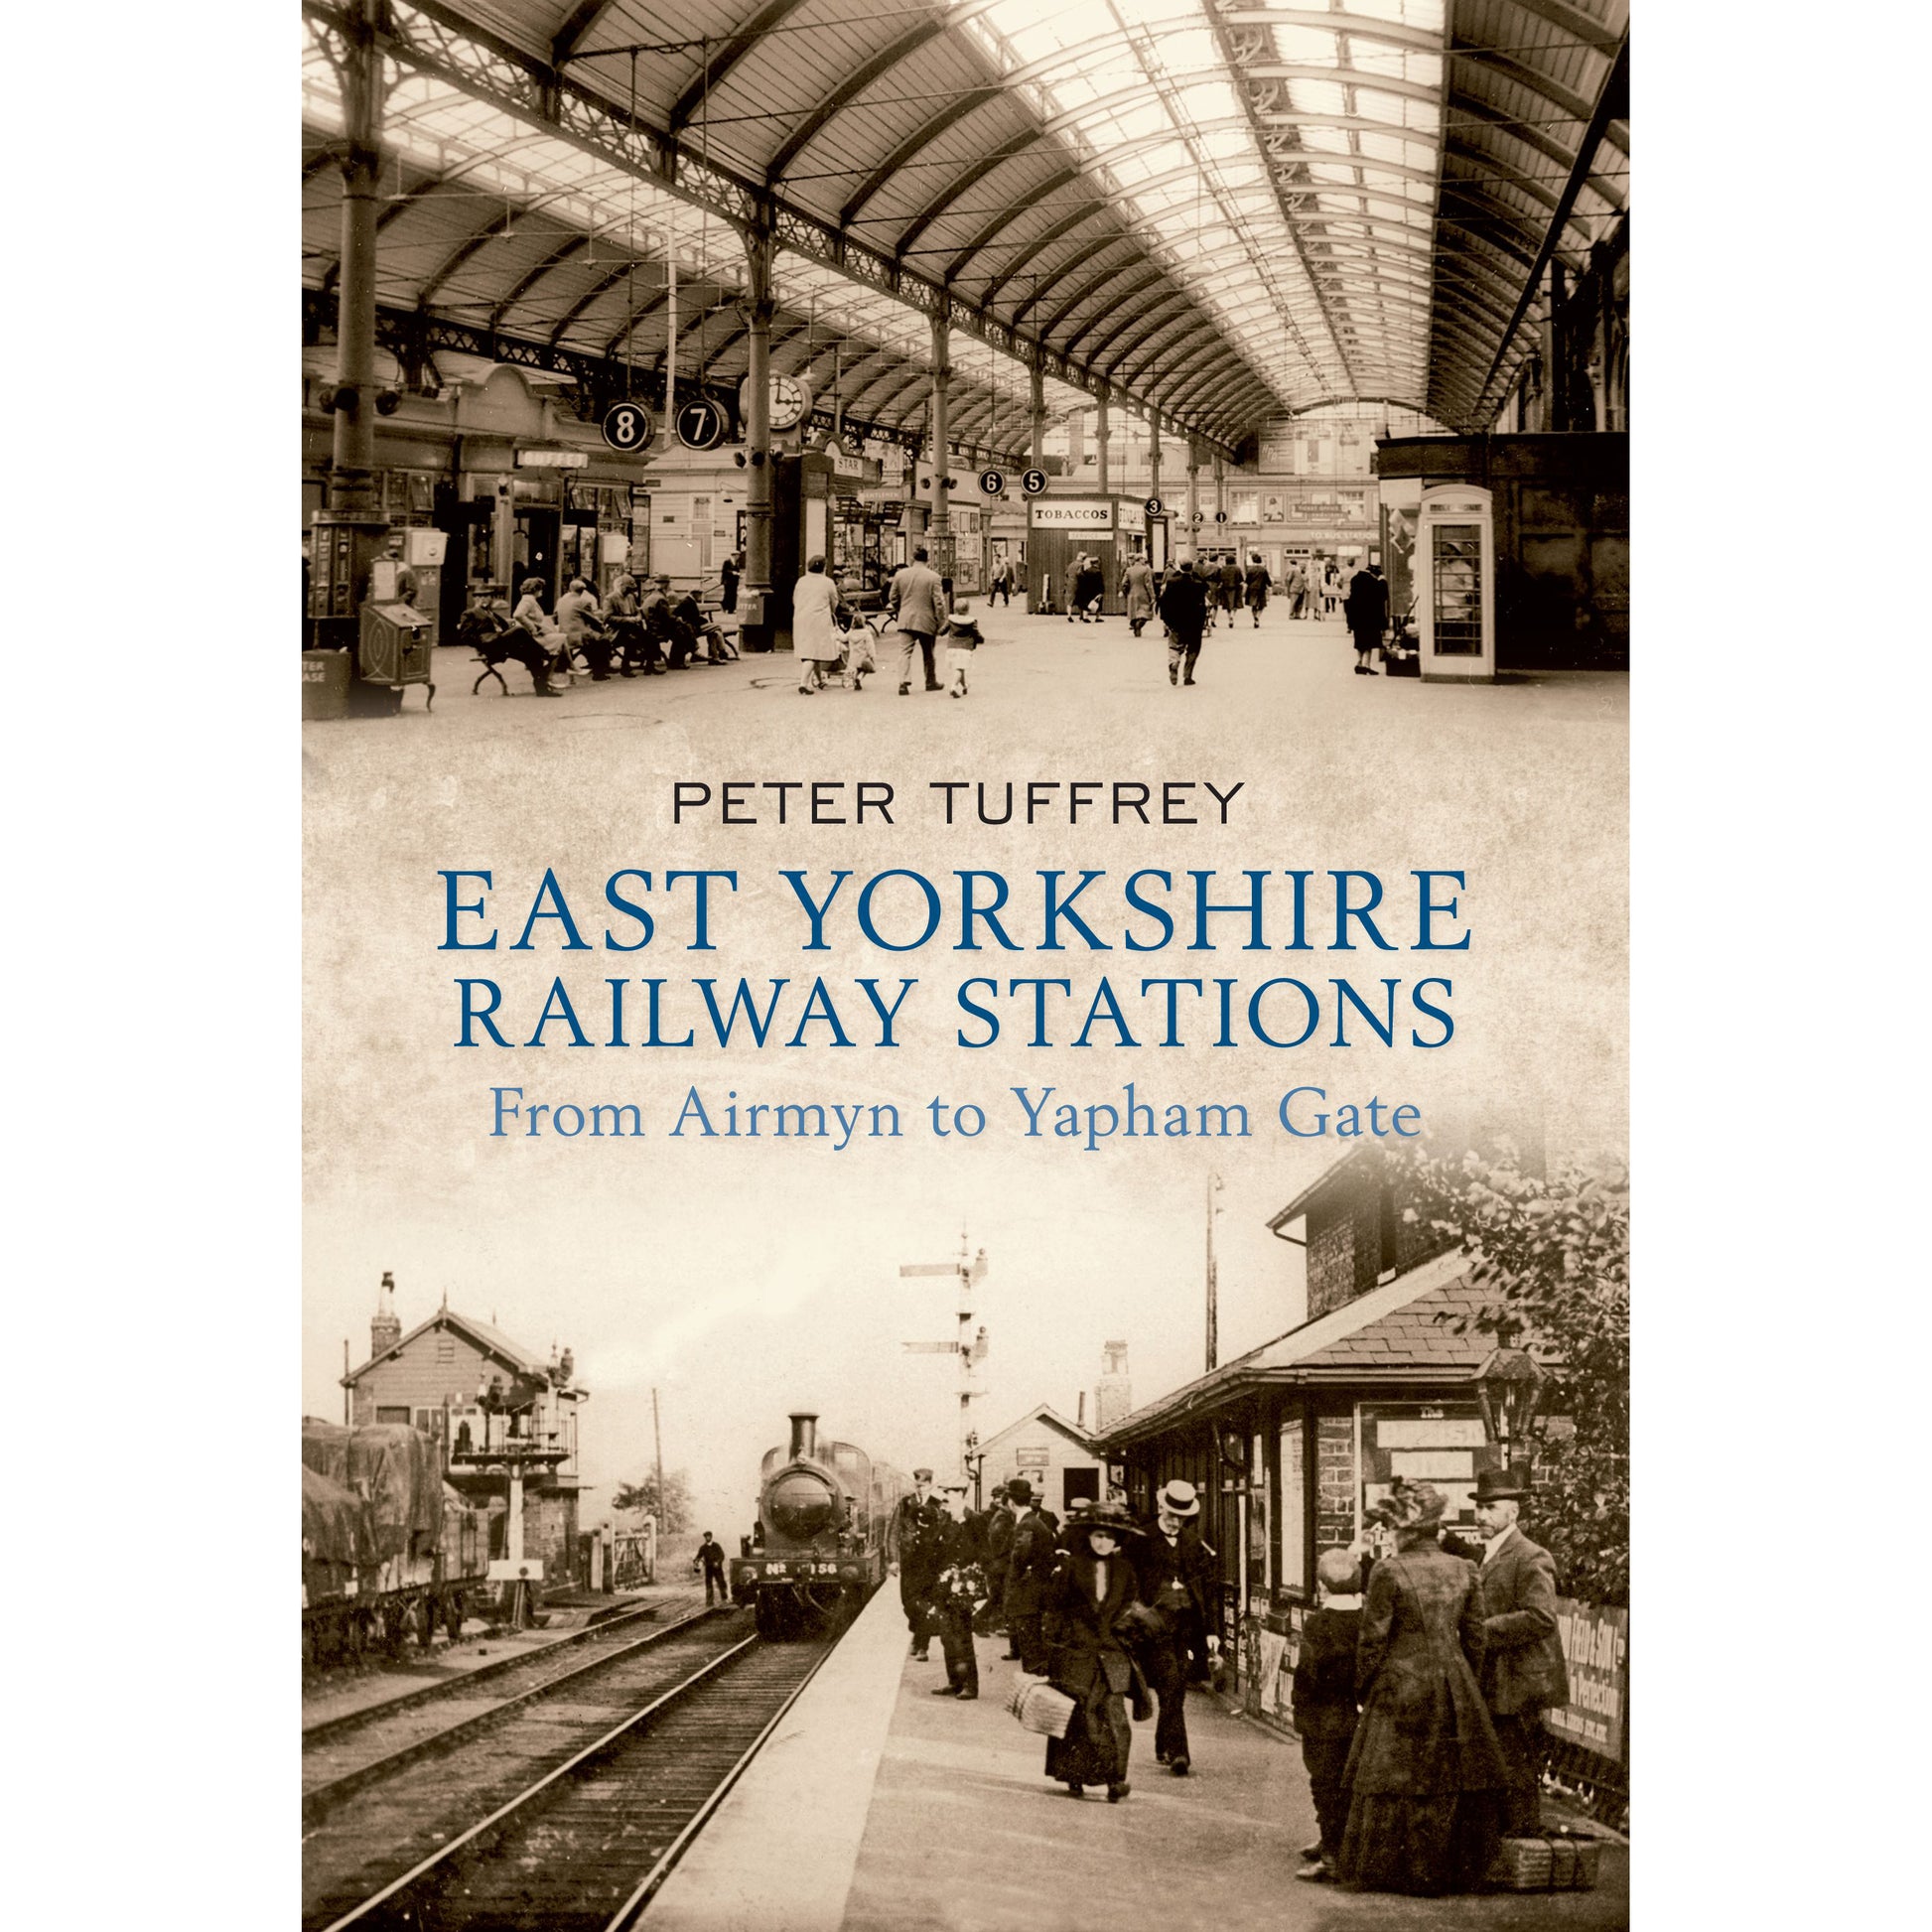 Front cover of book with two black and white photos - one of station concourse and one of platform. Peter Tuffrey East Yorkshire Railway Stations From Airmyn to Yapham Gate printed across middle.